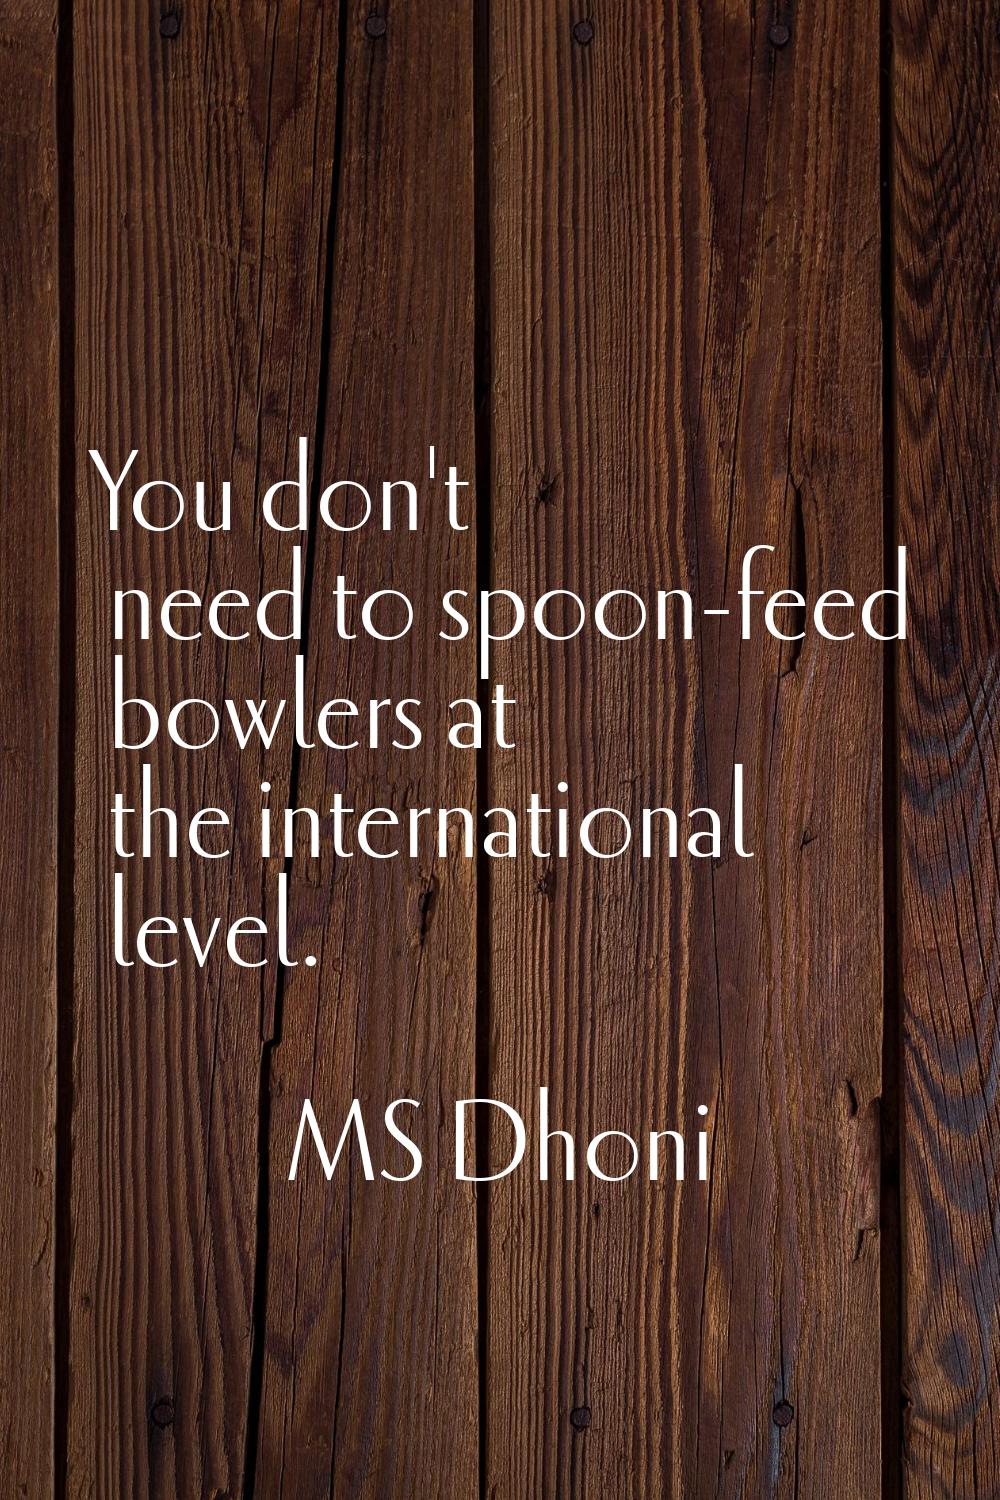 You don't need to spoon-feed bowlers at the international level.